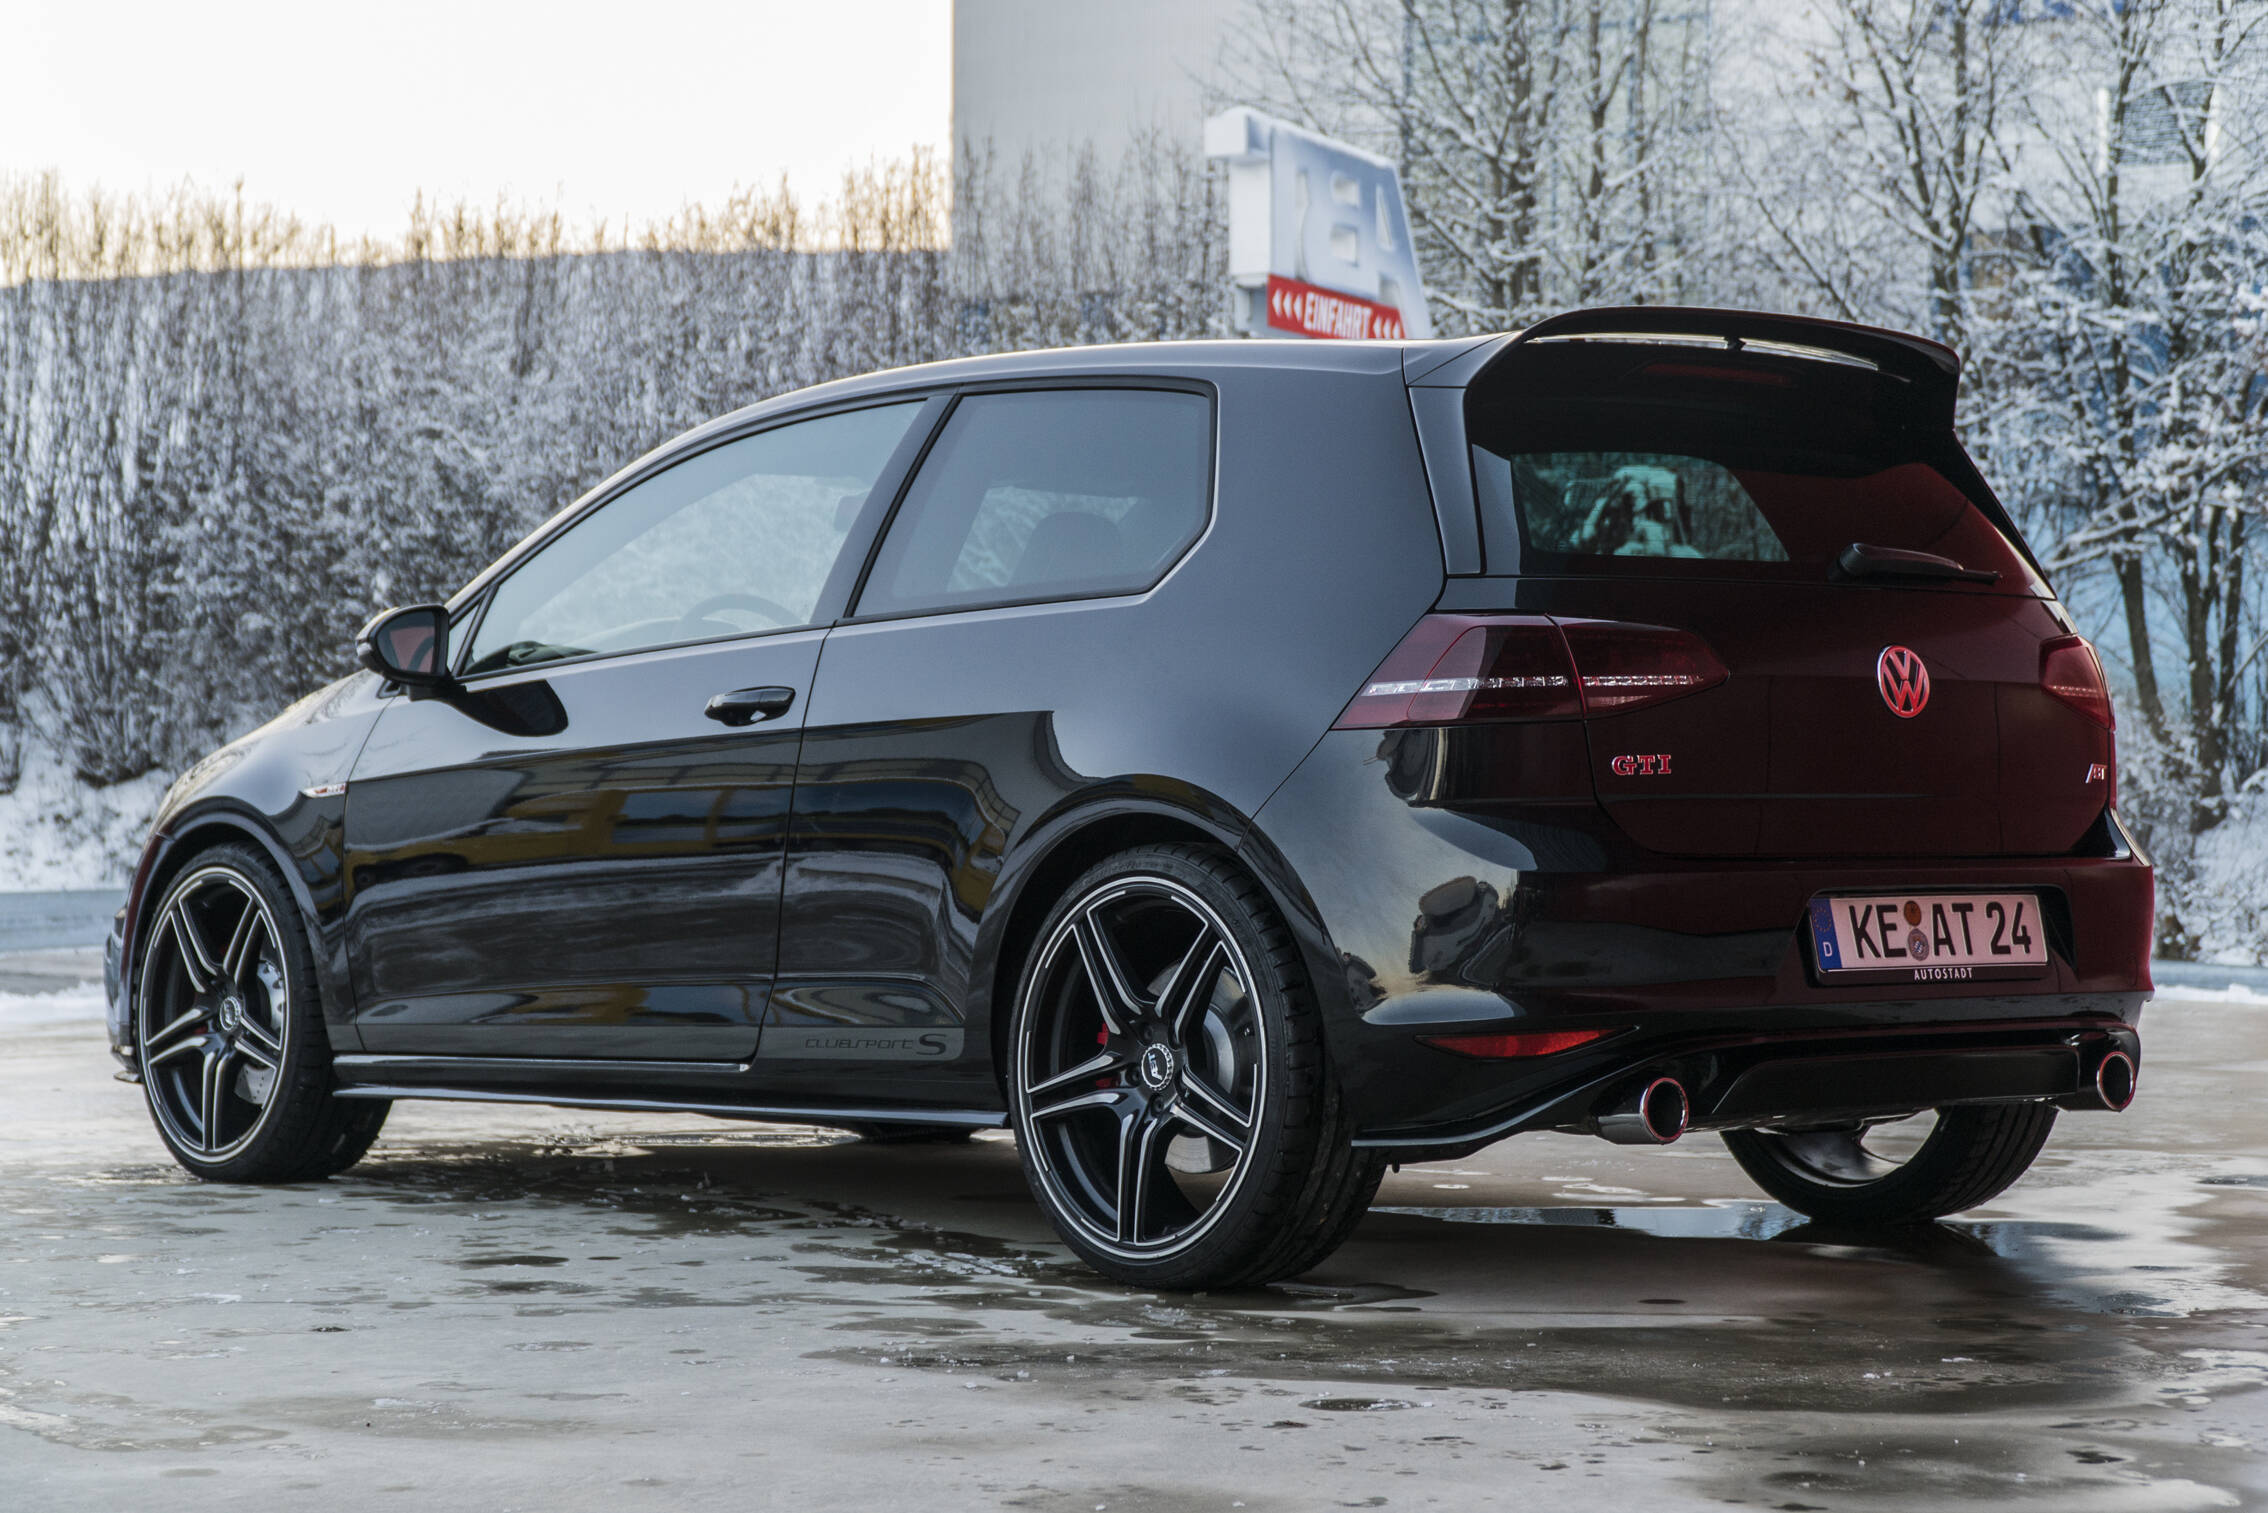 The VW Golf GTI Clubsport S with 370 HP and 460 Nm torque - Audi